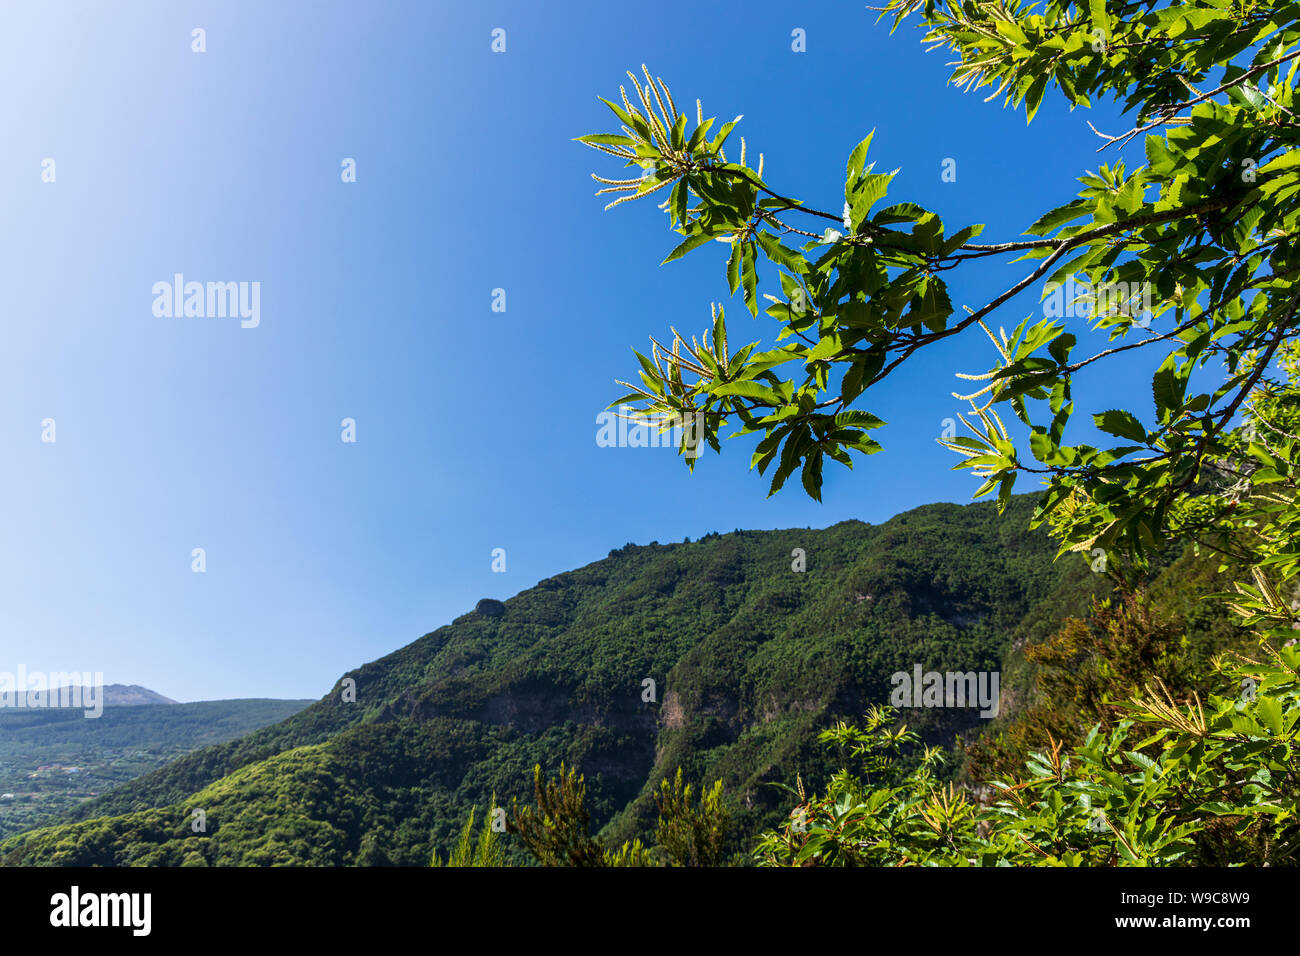 Prunus lusitanica, at a lookout on the Ladera de Tigaiga trail up to the Mirador de Asomadero from Los Realejos Alto in the Orotava Valley, Tenerife, Stock Photo